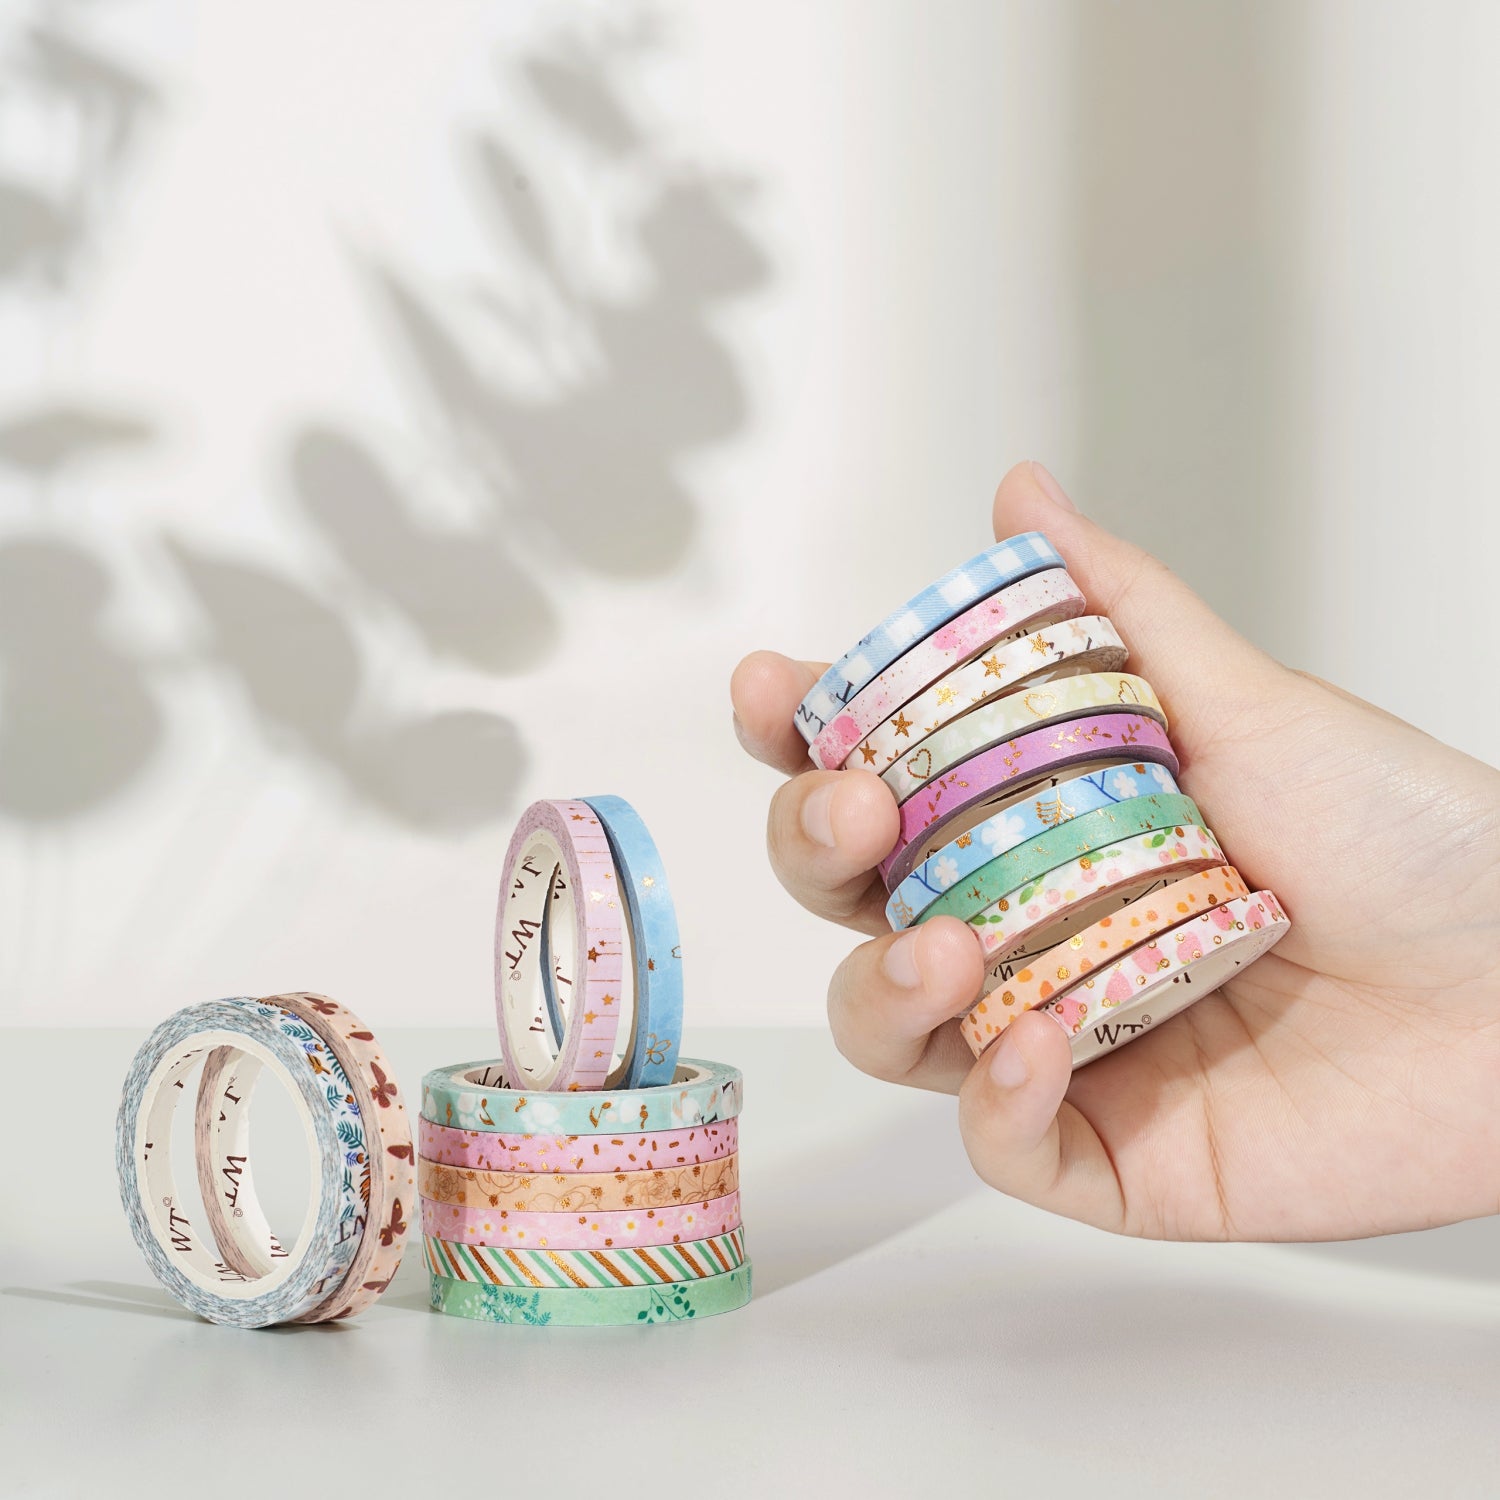 20 piece Summer Slim Washi Tape Set | The Washi Tape Shop. Beautiful Washi and Decorative Tape For Bullet Journals, Gift Wrapping, Planner Decoration and DIY Projects